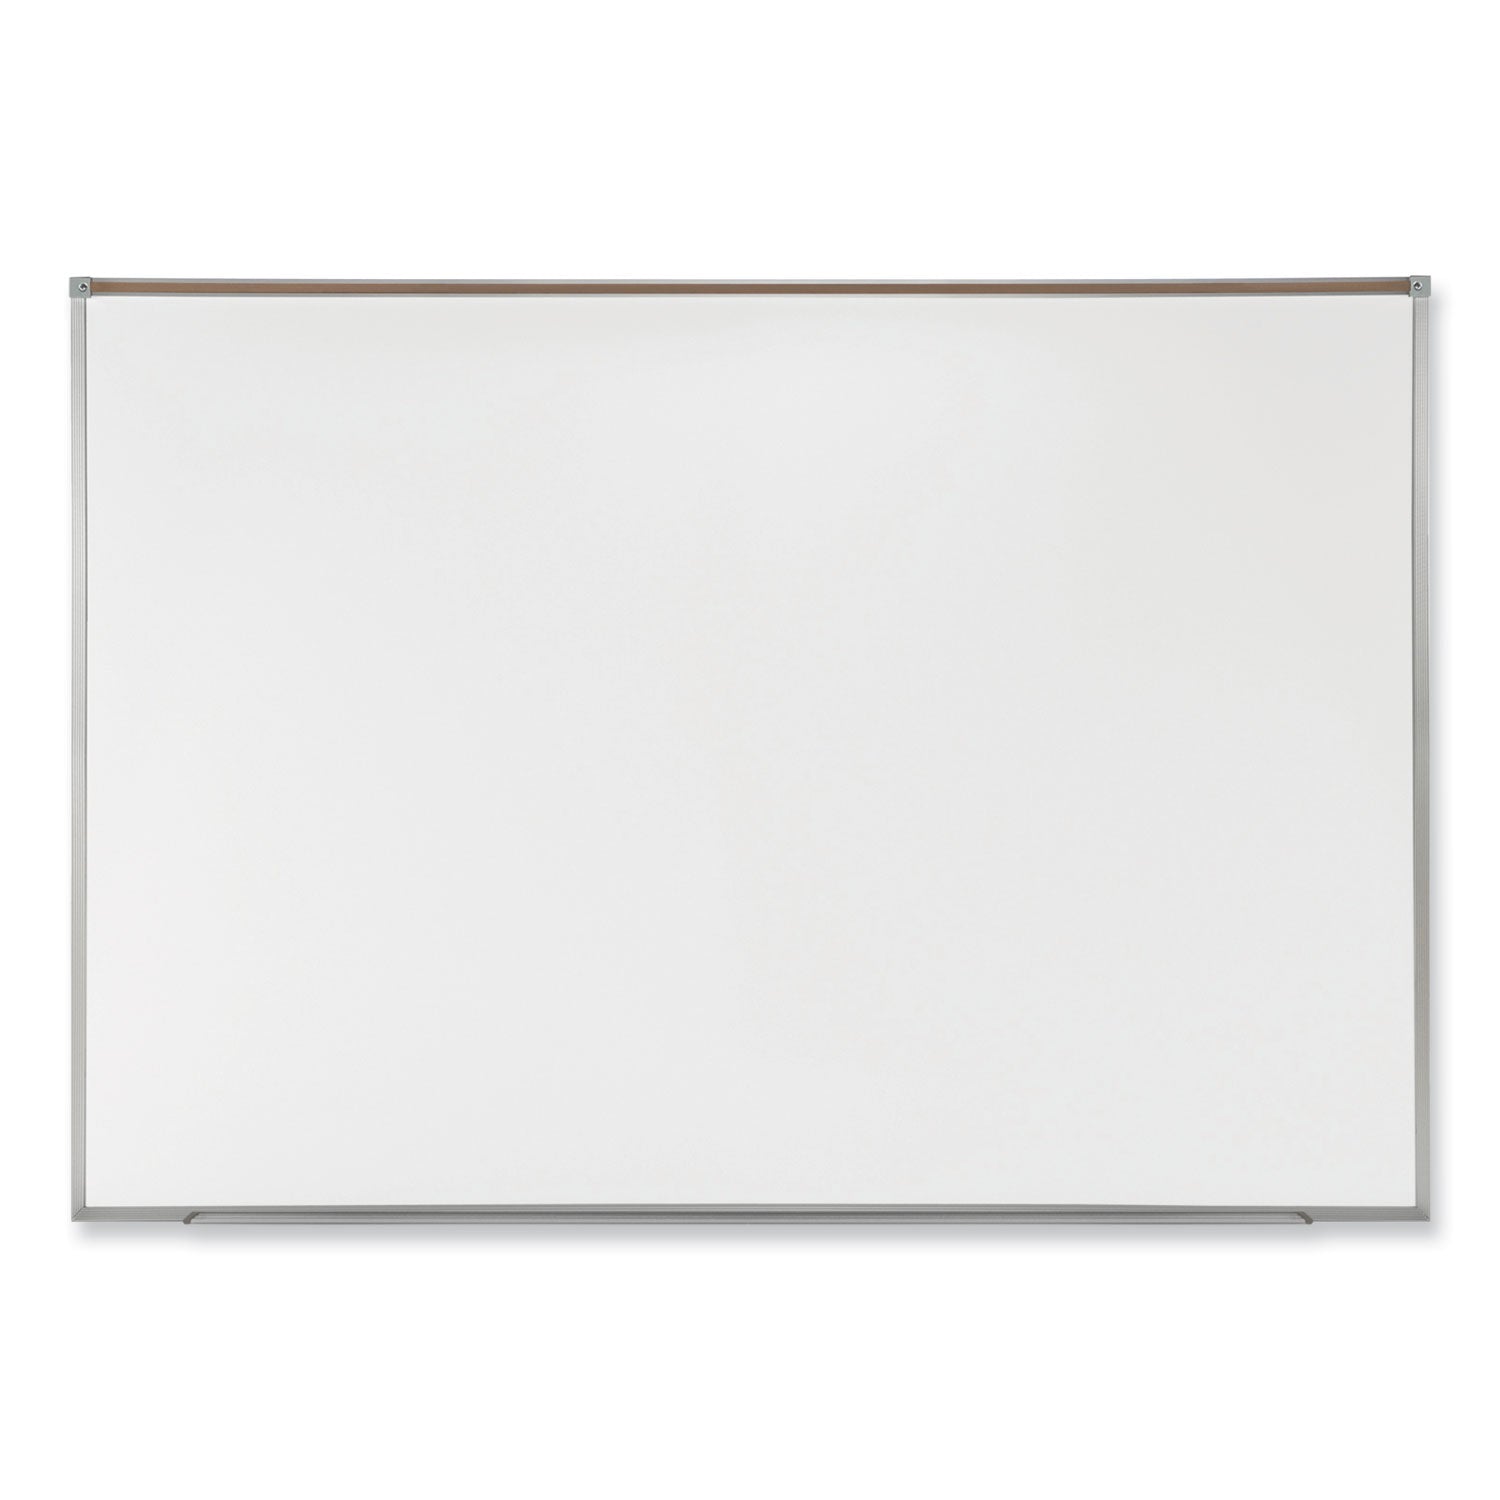 Proma Magnetic Porcelain Projection Whiteboard w/Satin Aluminum Frame, 72.5 x 48.5, White Surface,Ships in 7-10 Business Days - 